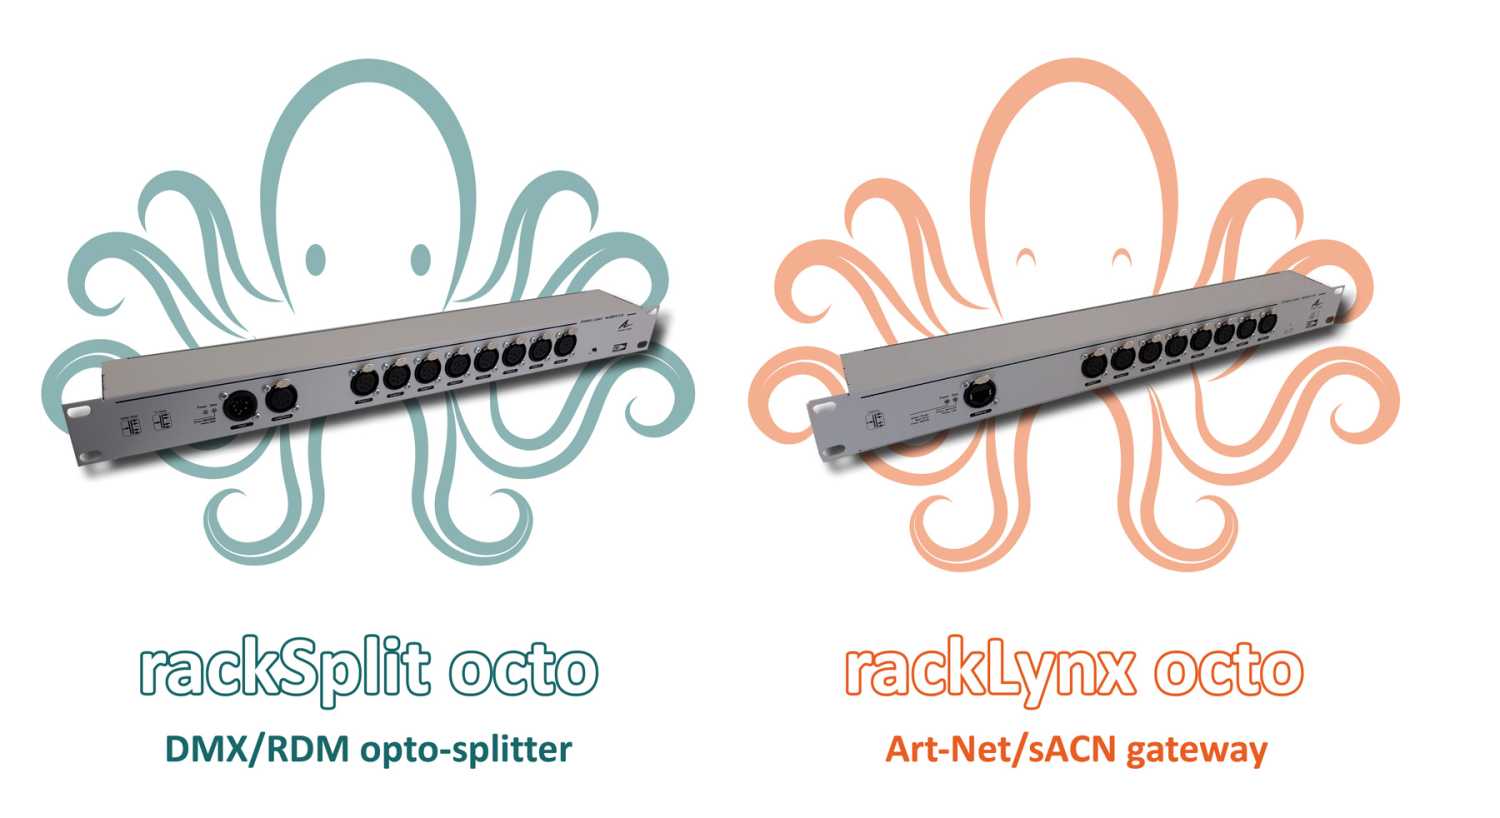 Signature 'skinny rack' octoboxes will be featured